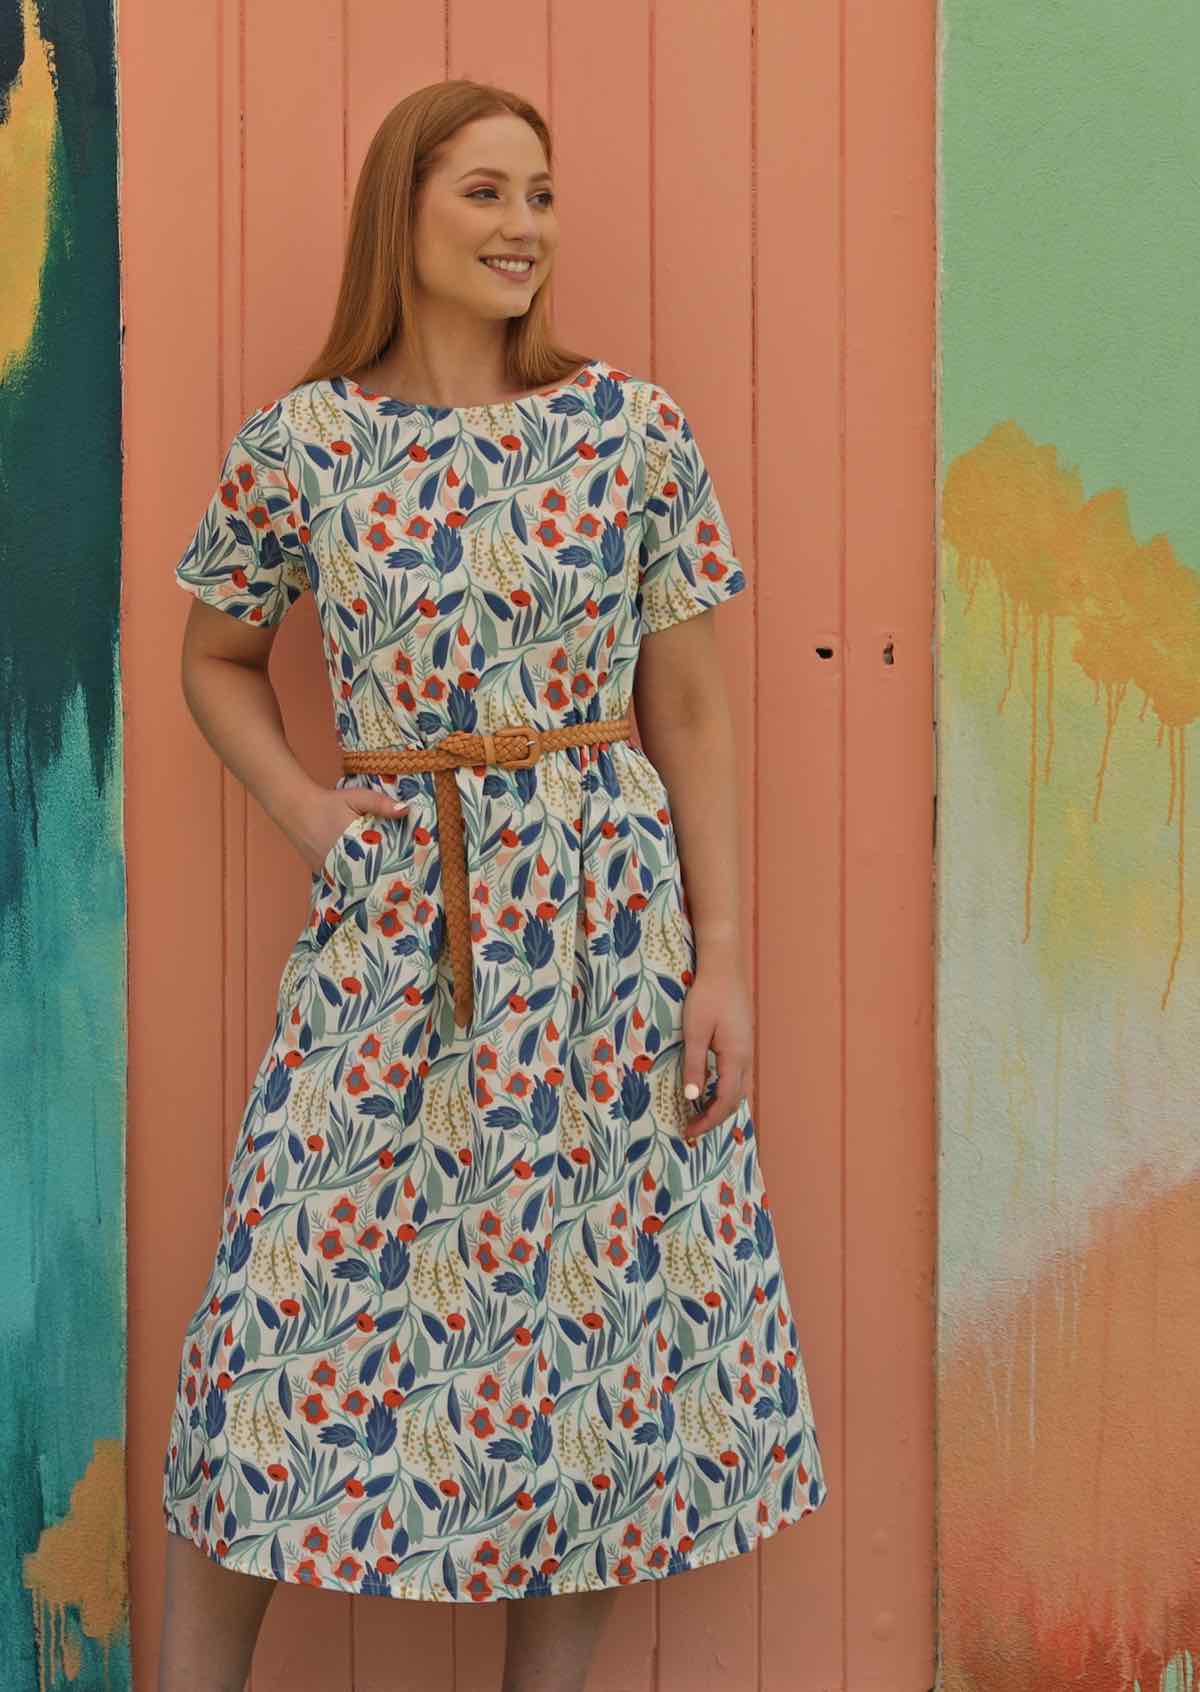 Model wears floral cotton dress with leather belt